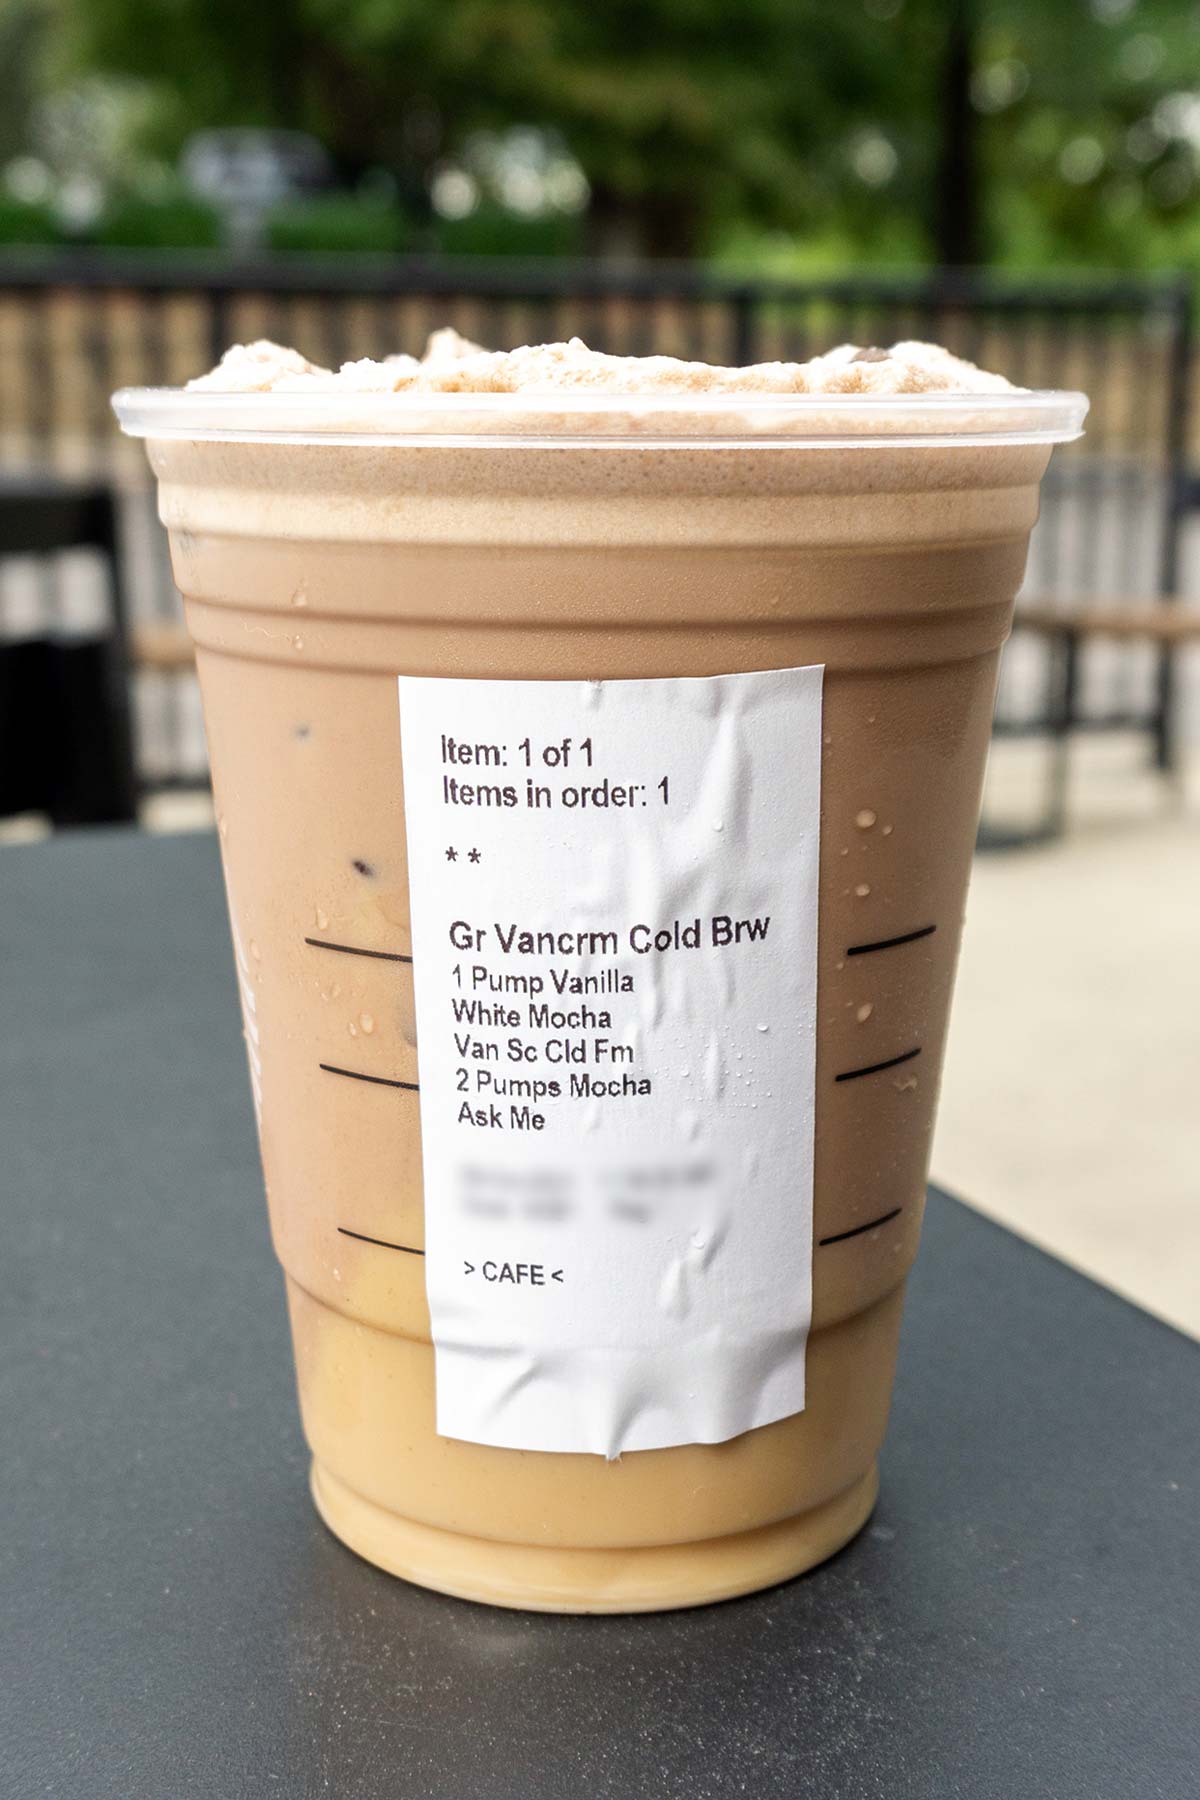 Cookies and Cream Cold Brew secret menu drink with Starbucks order label.